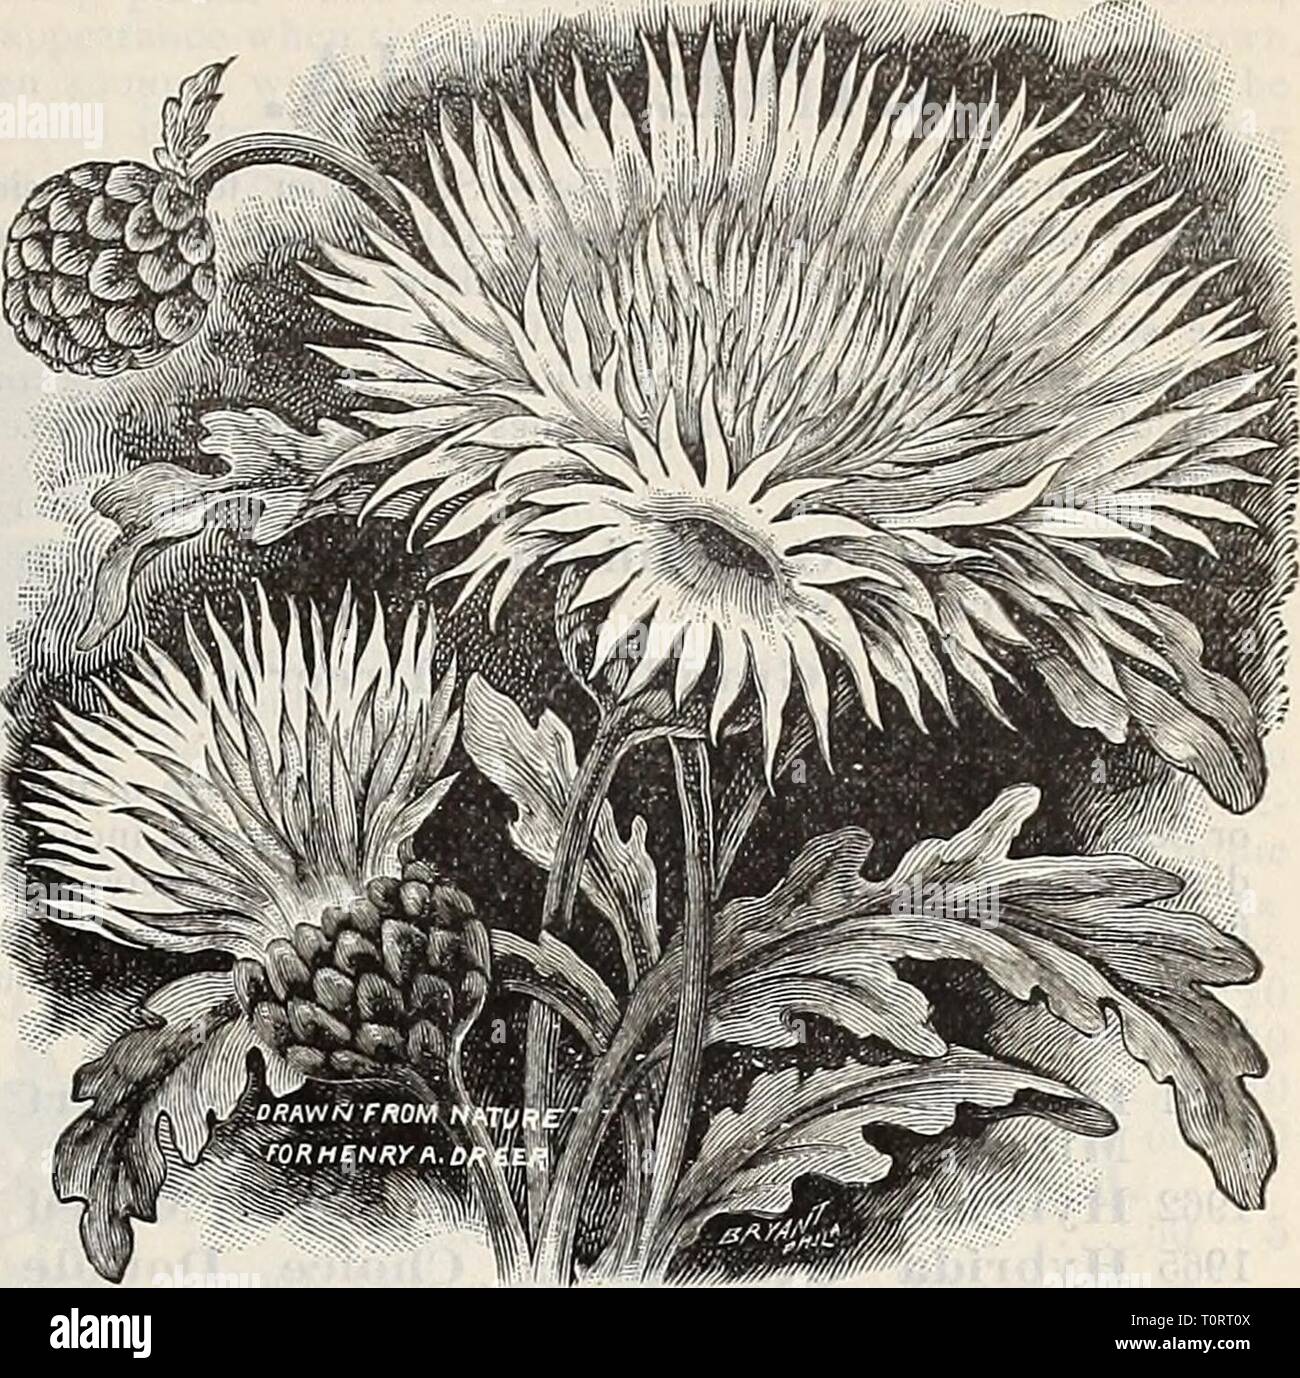 Dreer's 1901 garden calendar (1901) Dreer's 1901 garden calendar  dreers1901garden1901henr Year: 1901  ENRTADRffiR -PHIlAOmiAJ'A-W/ RELIABlEfLOWER SEEDS CENTAUREA. (J)'&lt;v offer of lie rieties on page 9.) O 5 5 5 10 10 Flowering Varieties. Favorite annuals do well everywhere. Fine cut flowers. PER PKT. 1886 CyanuS Blue {Kaiser Blume, Corn Flower or Blue Bottle) 18S7 â White 1890 â Mixed, l^eet 1889 â Double Flowered. Mixed colore; 18SS â Ovvarf Victoria. 8 inches ; dark blue flowers 1891 Aniericaua Alba. A variety of strong growth, 3 to 5 feet high, each branch terminated with a large nearly Stock Photo